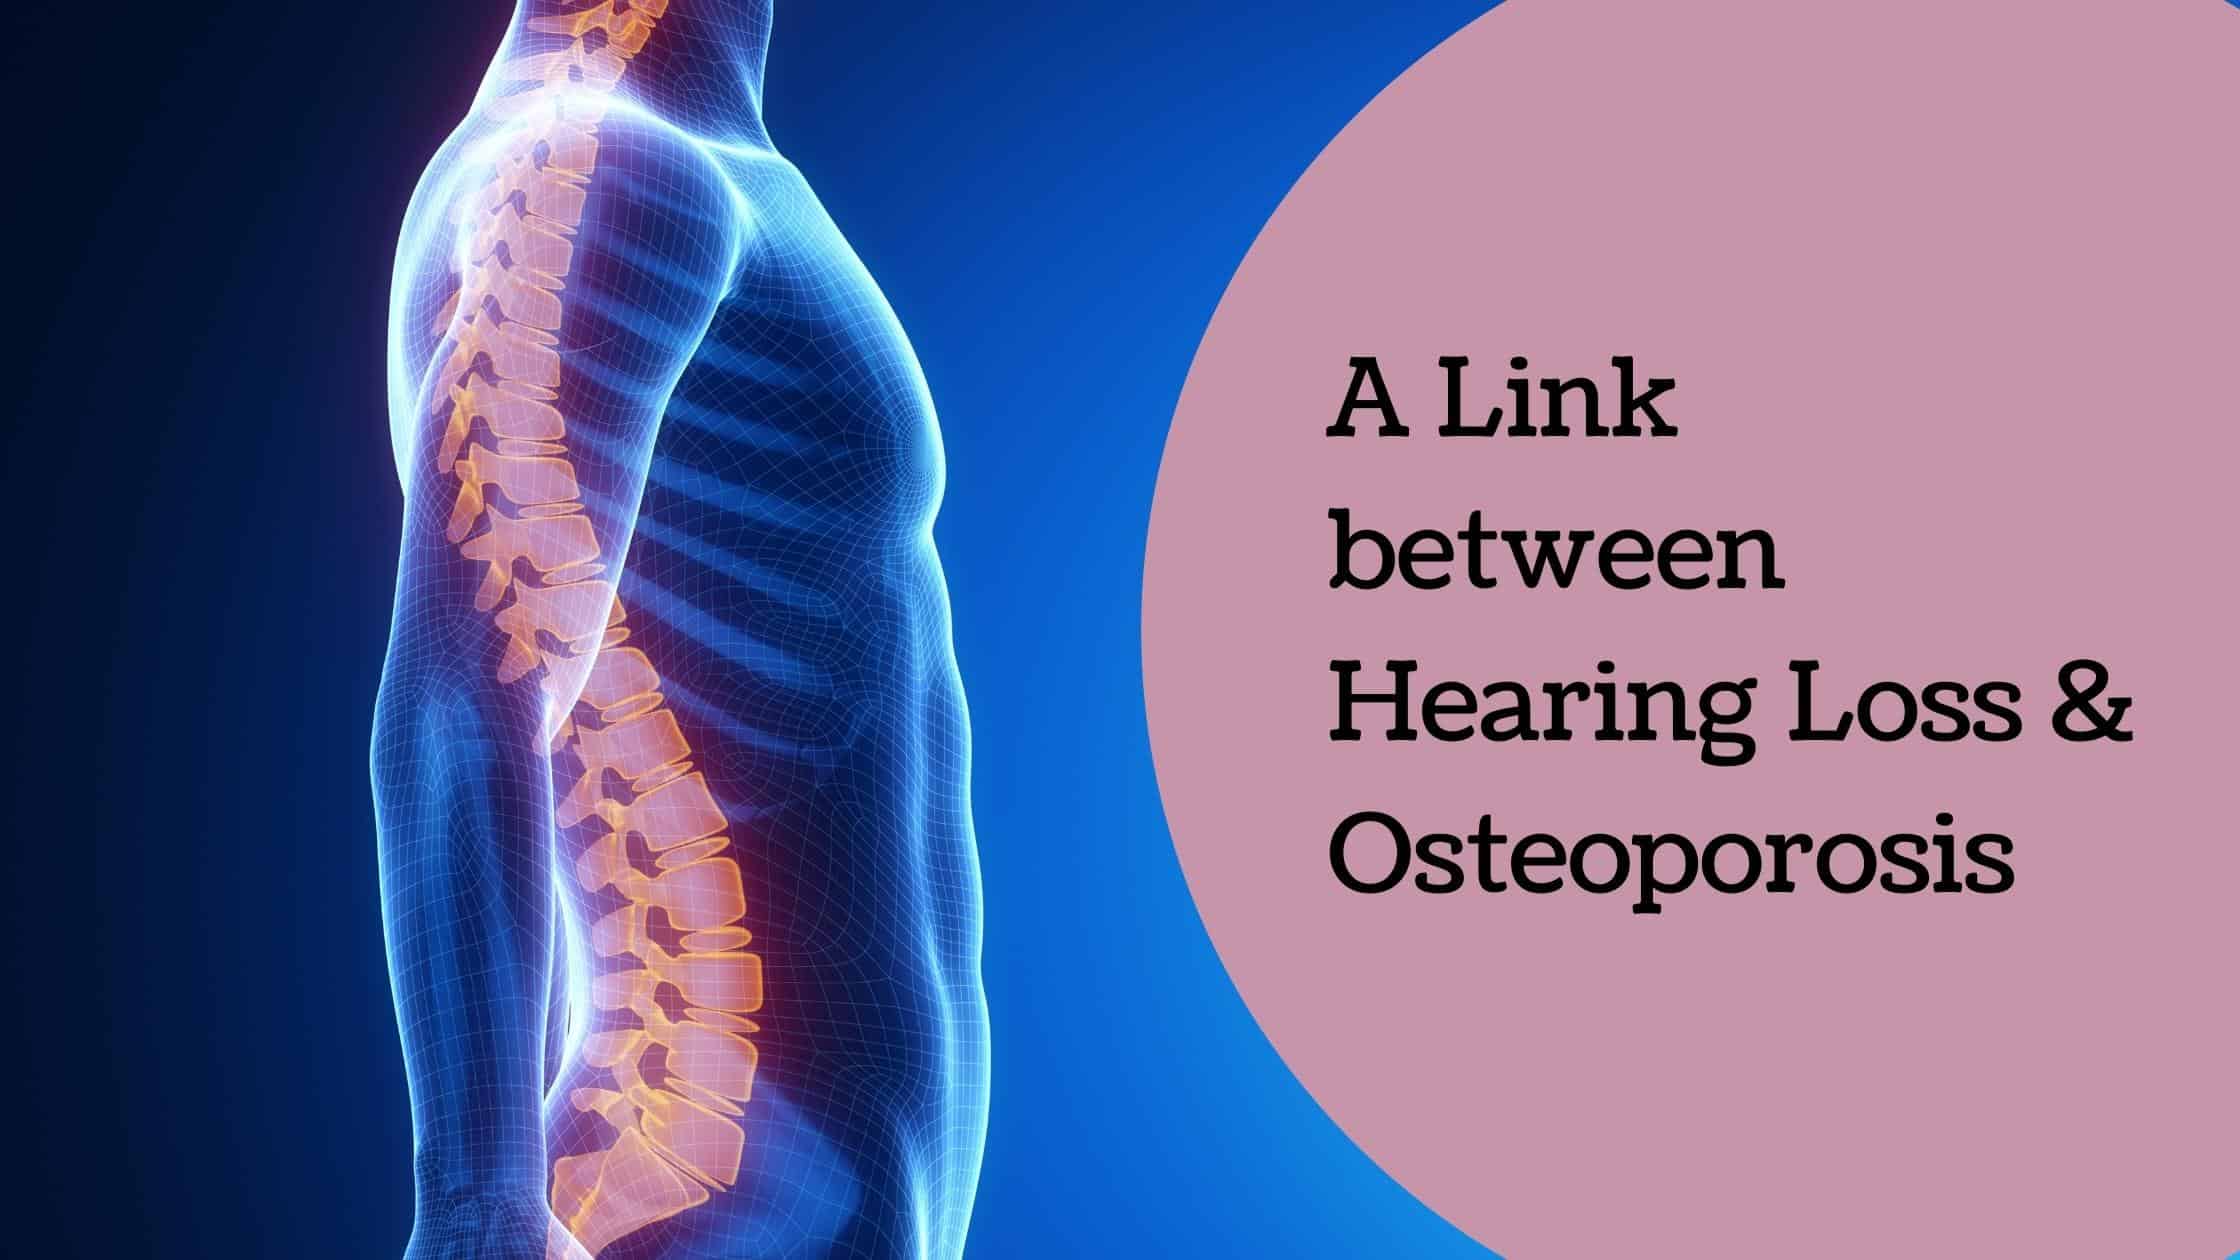 Featured image for “A Link between Hearing Loss & Osteoporosis”